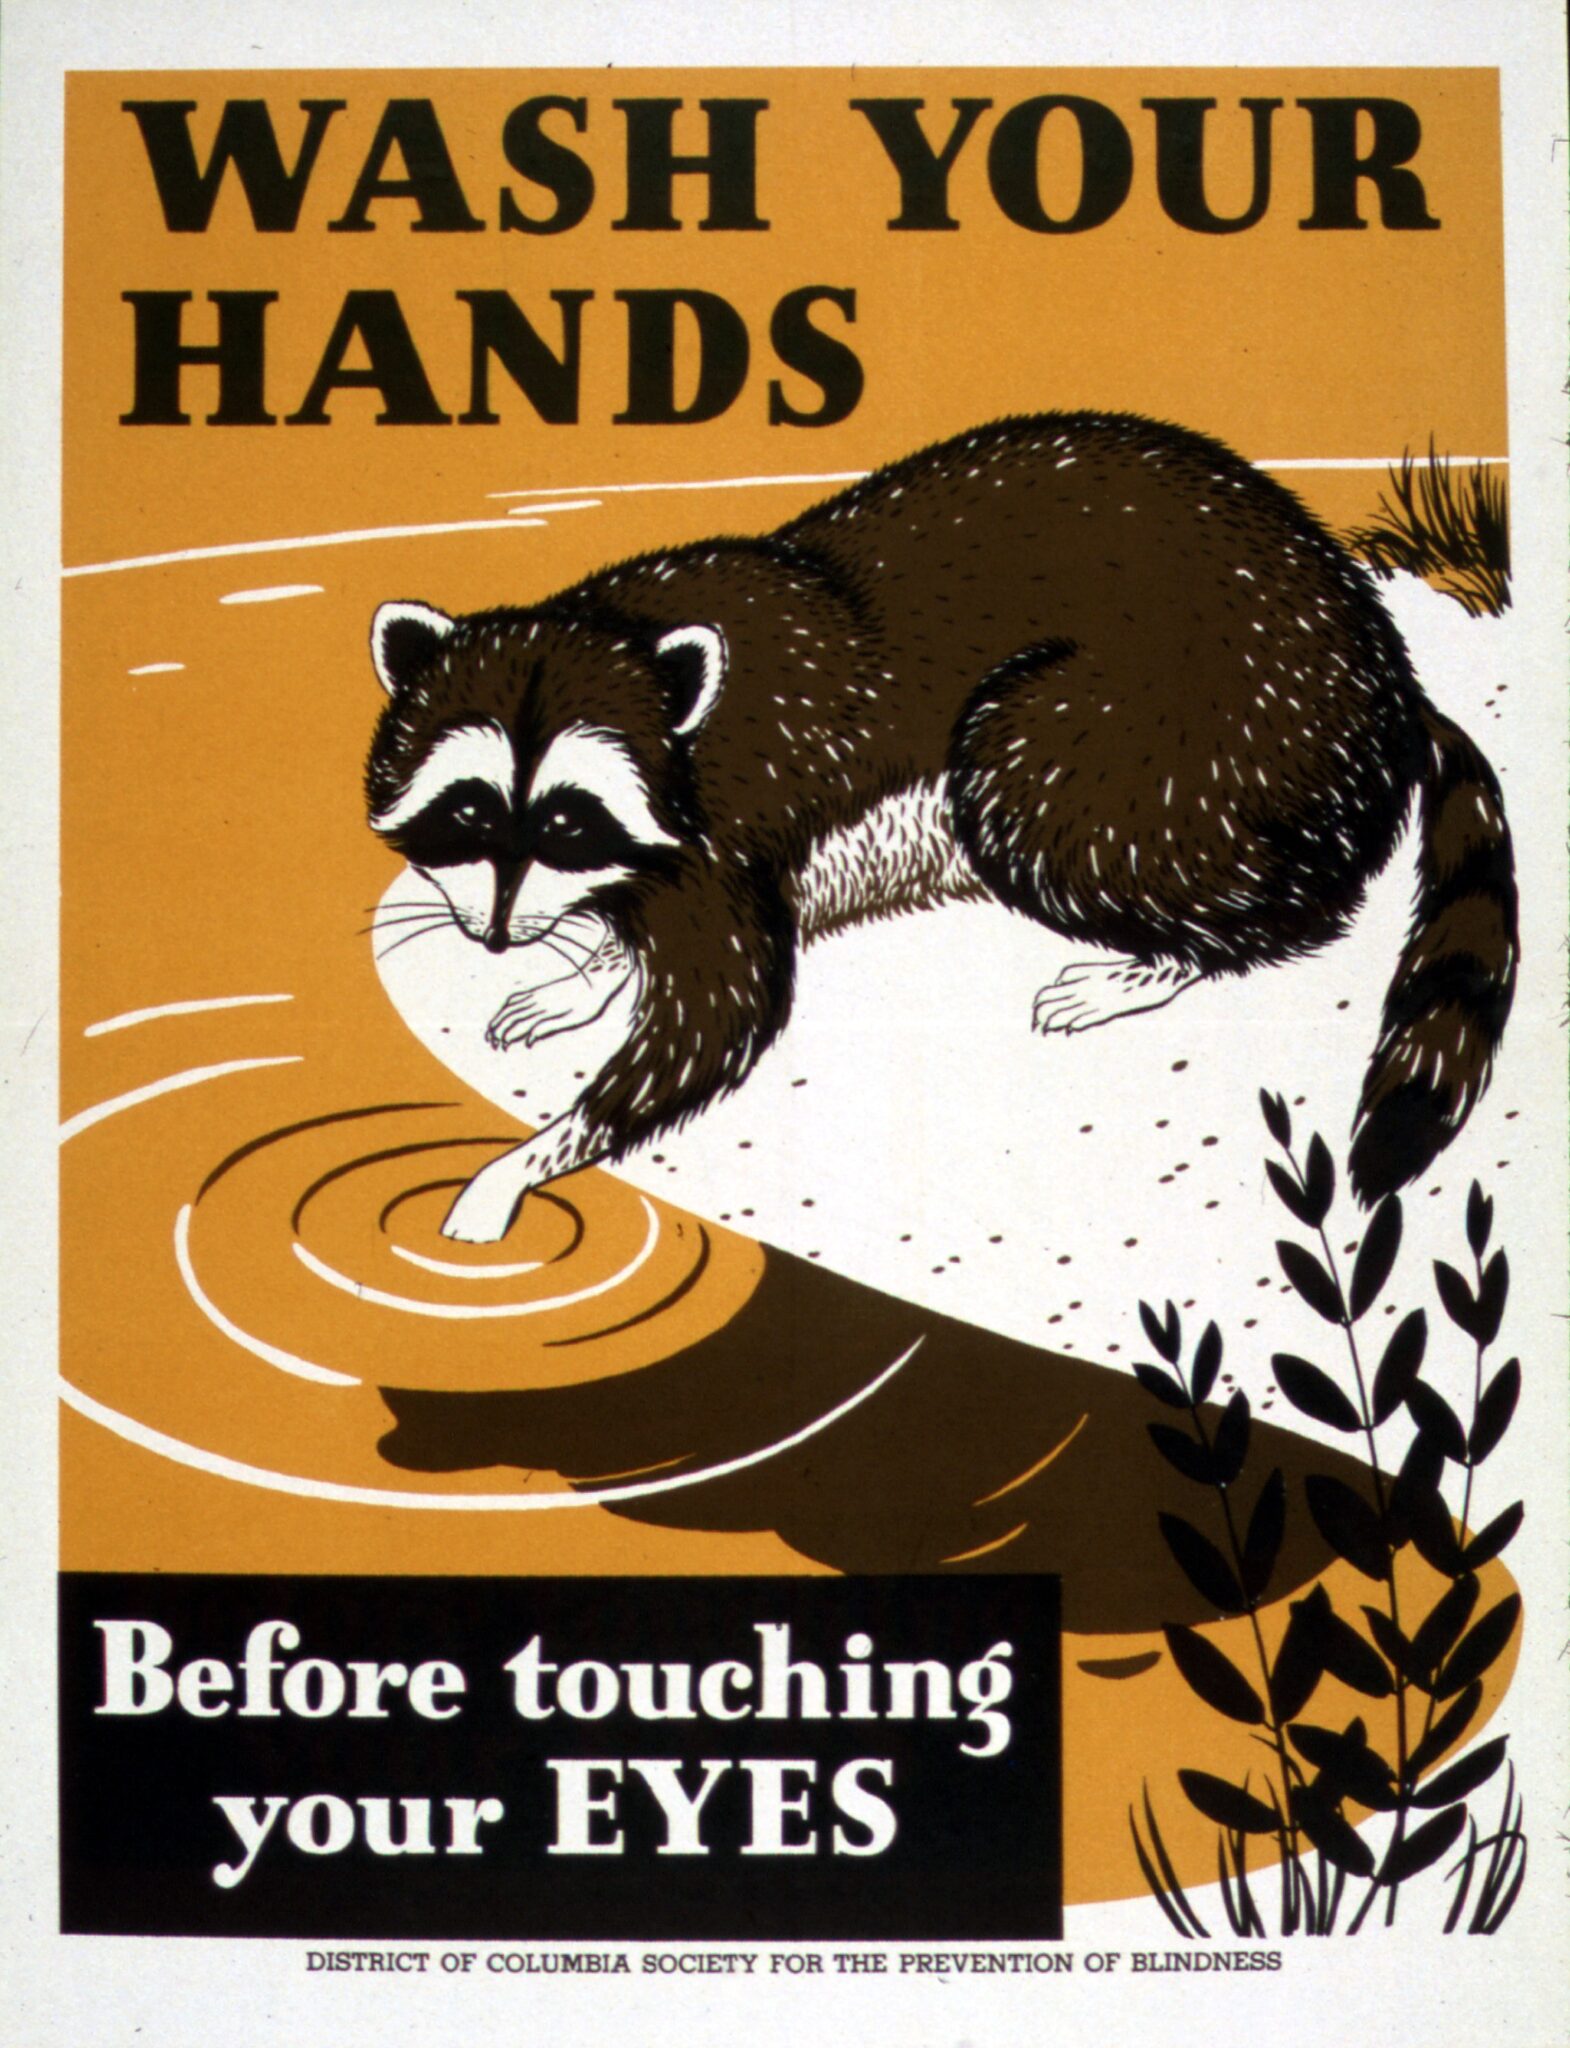 Vintage Public Health Posters That Helped People Take Smart Precautions During Past Crises